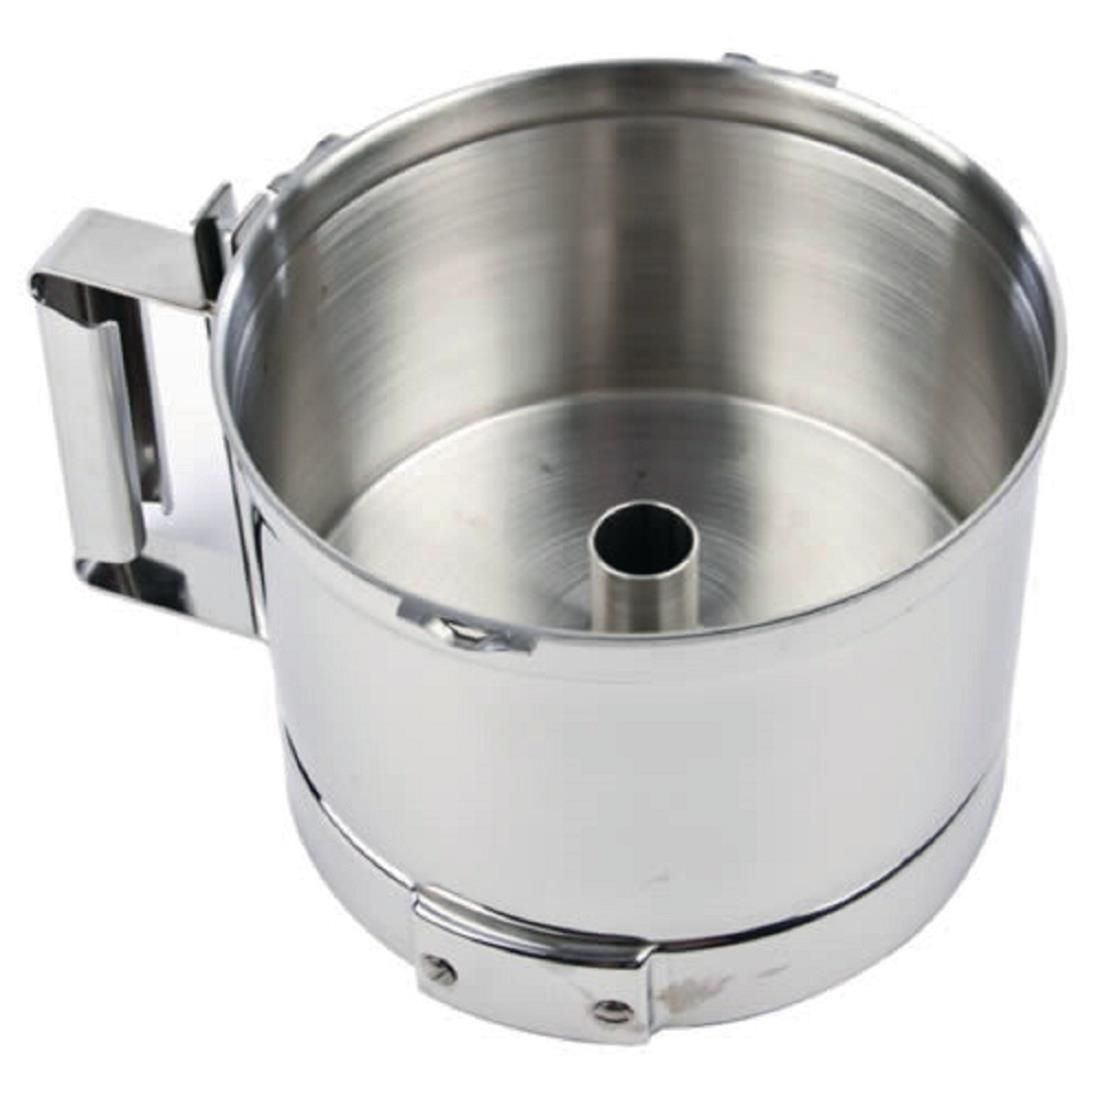 K177 Robot Coupe St/St Cutter Bowl (Only) 3Litre - Ref 39761/104077 JD Catering Equipment Solutions Ltd